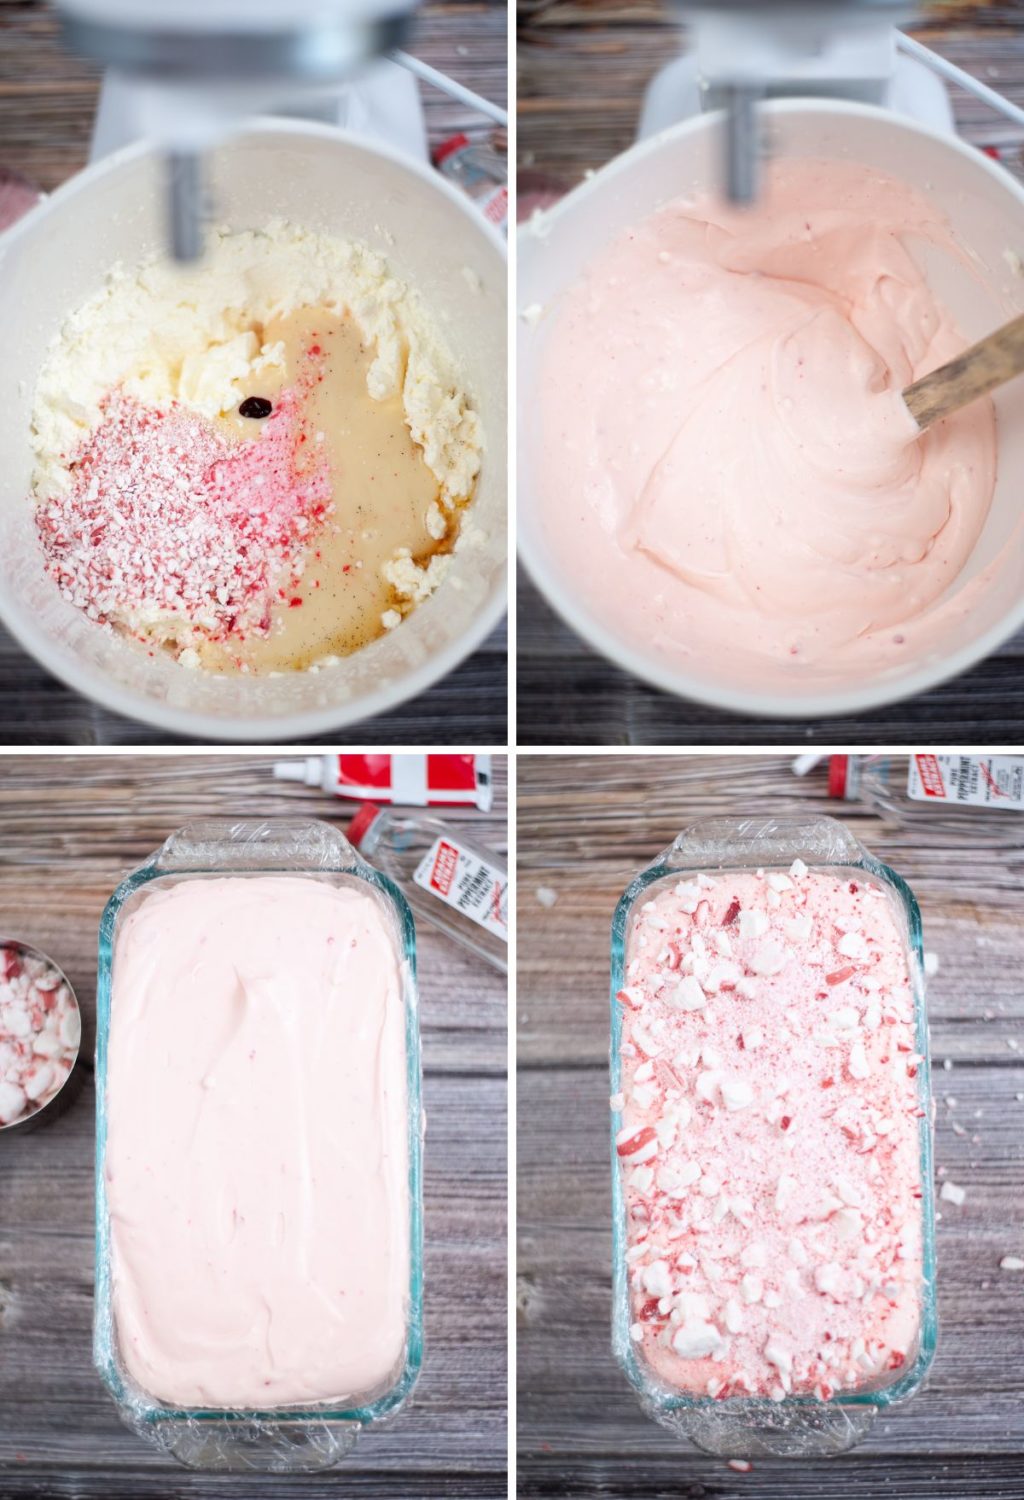 A series of photos showing how to make a candy cane cake.